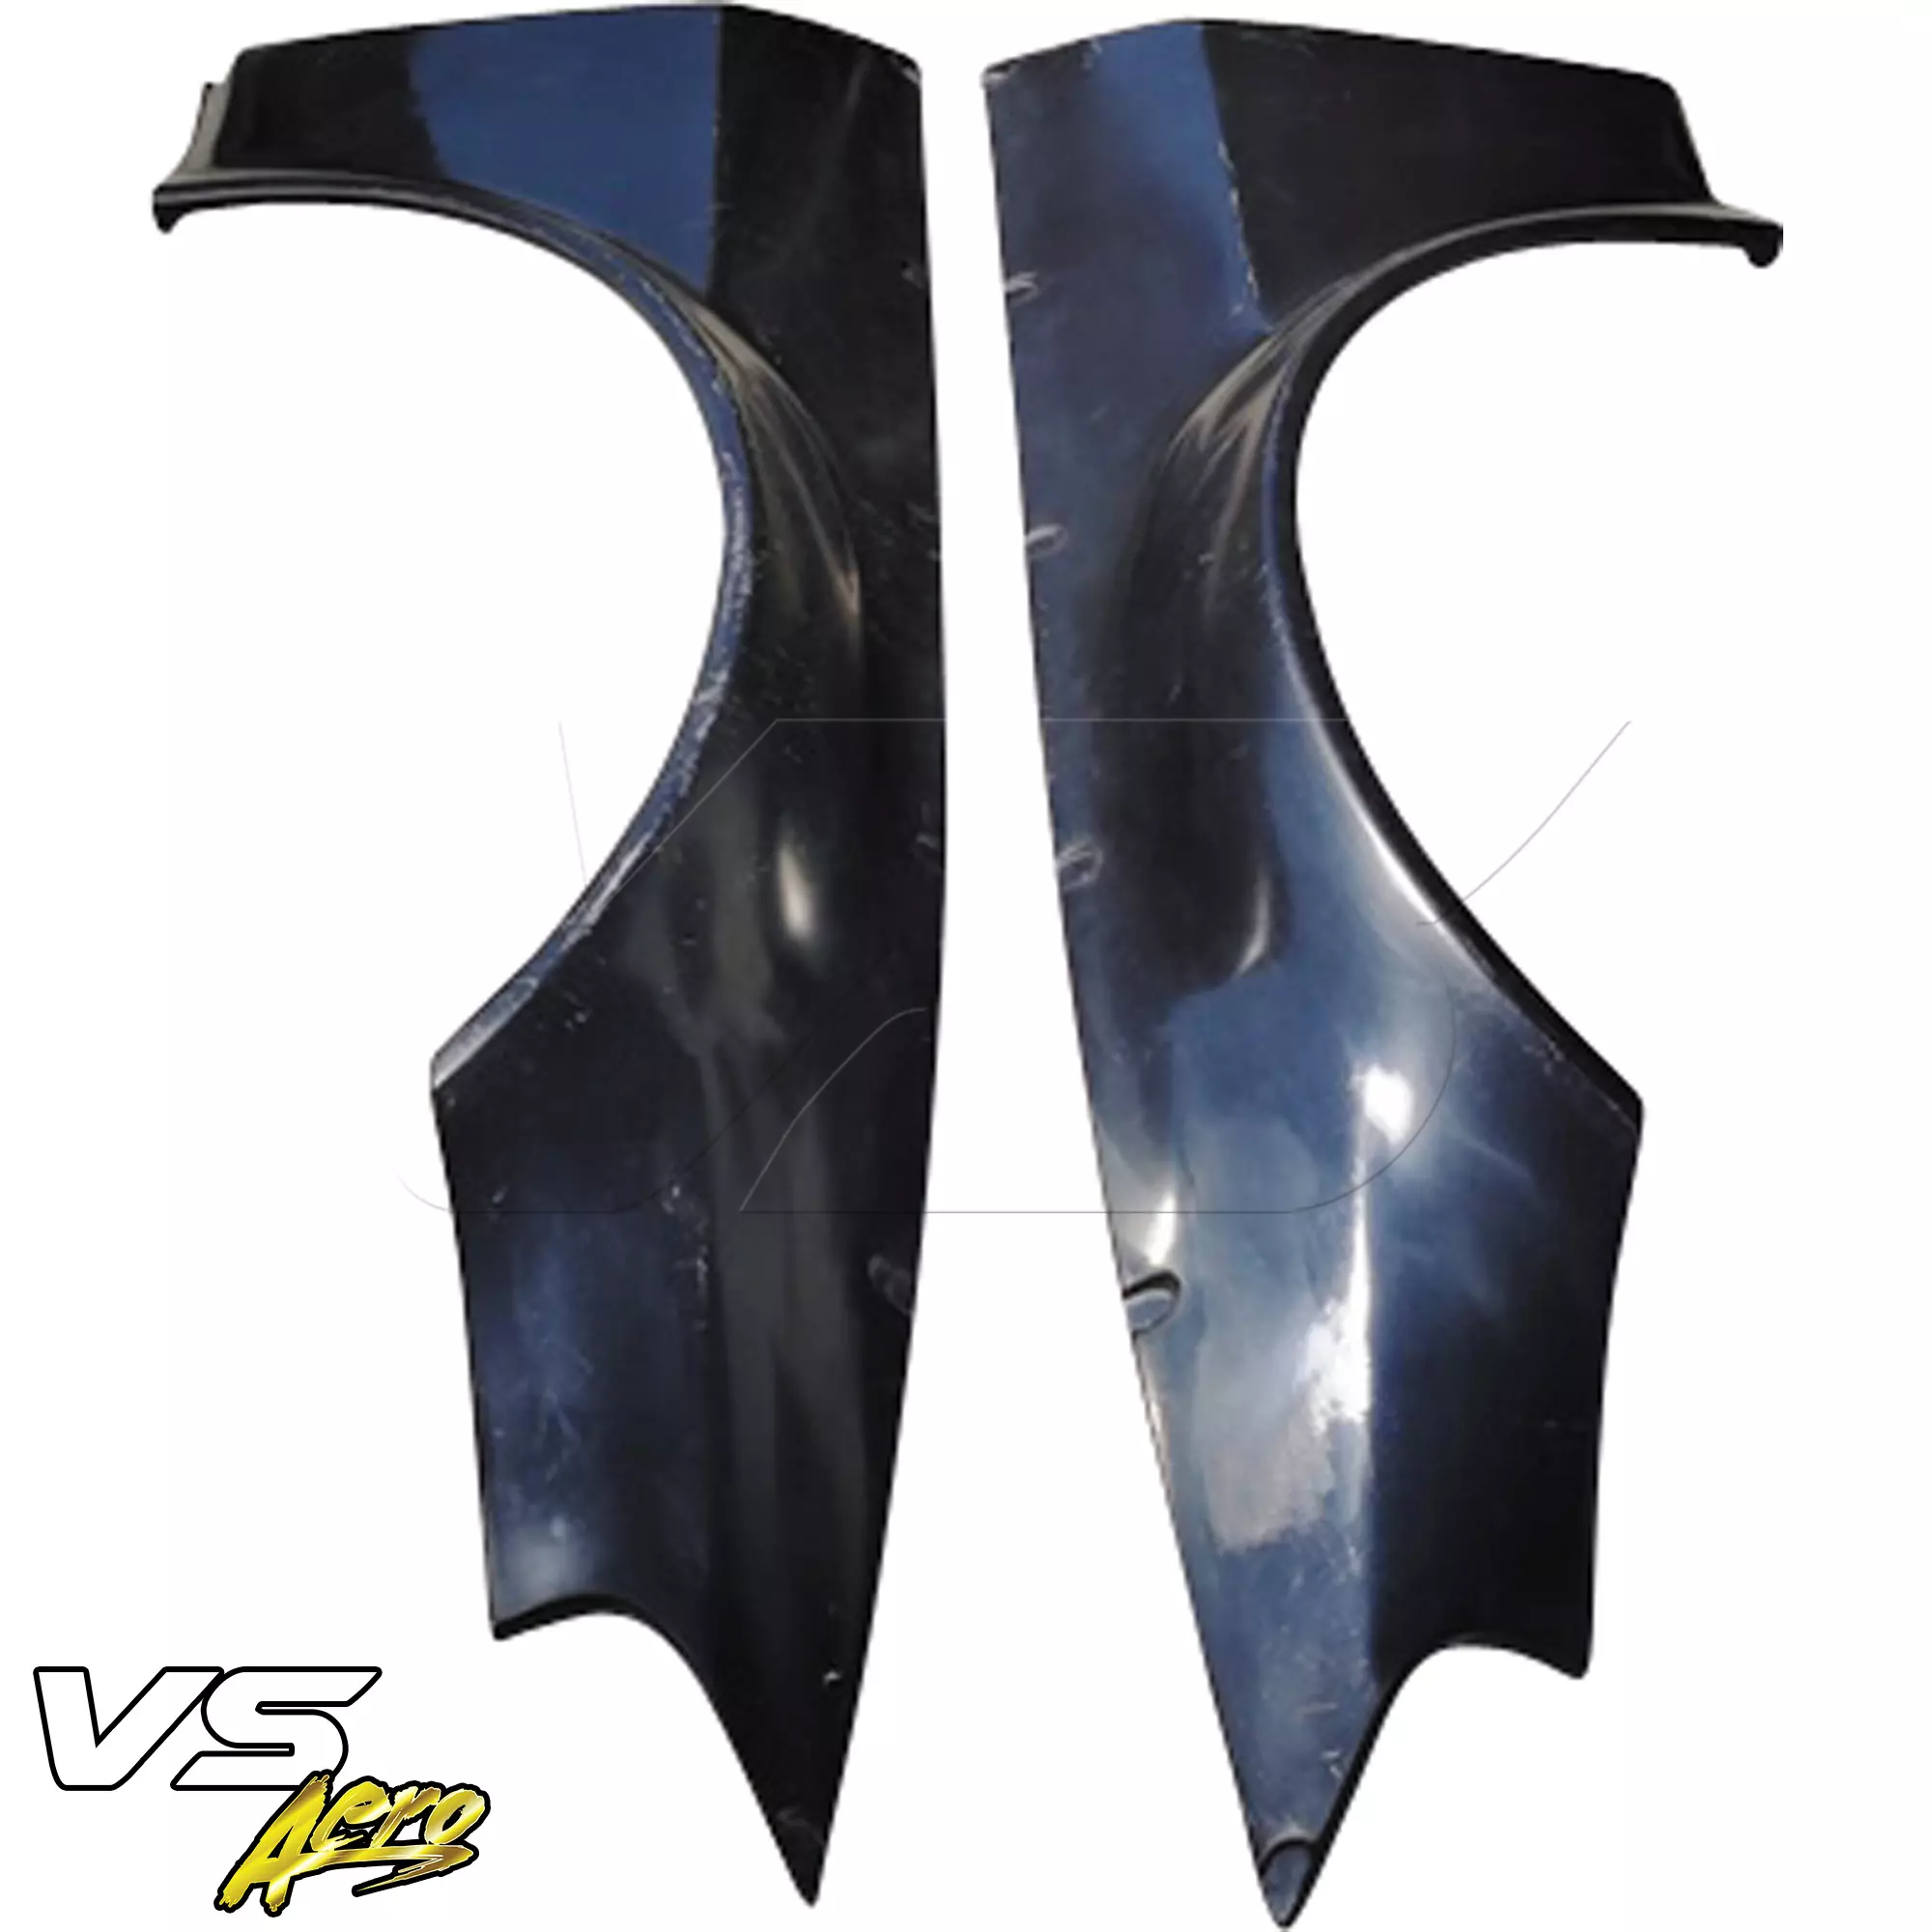 VSaero FRP TKYO Wide Body 65mm Fender Flares (front) > Nissan Skyline R33 1995-1998 > 2dr Coupe - Image 3